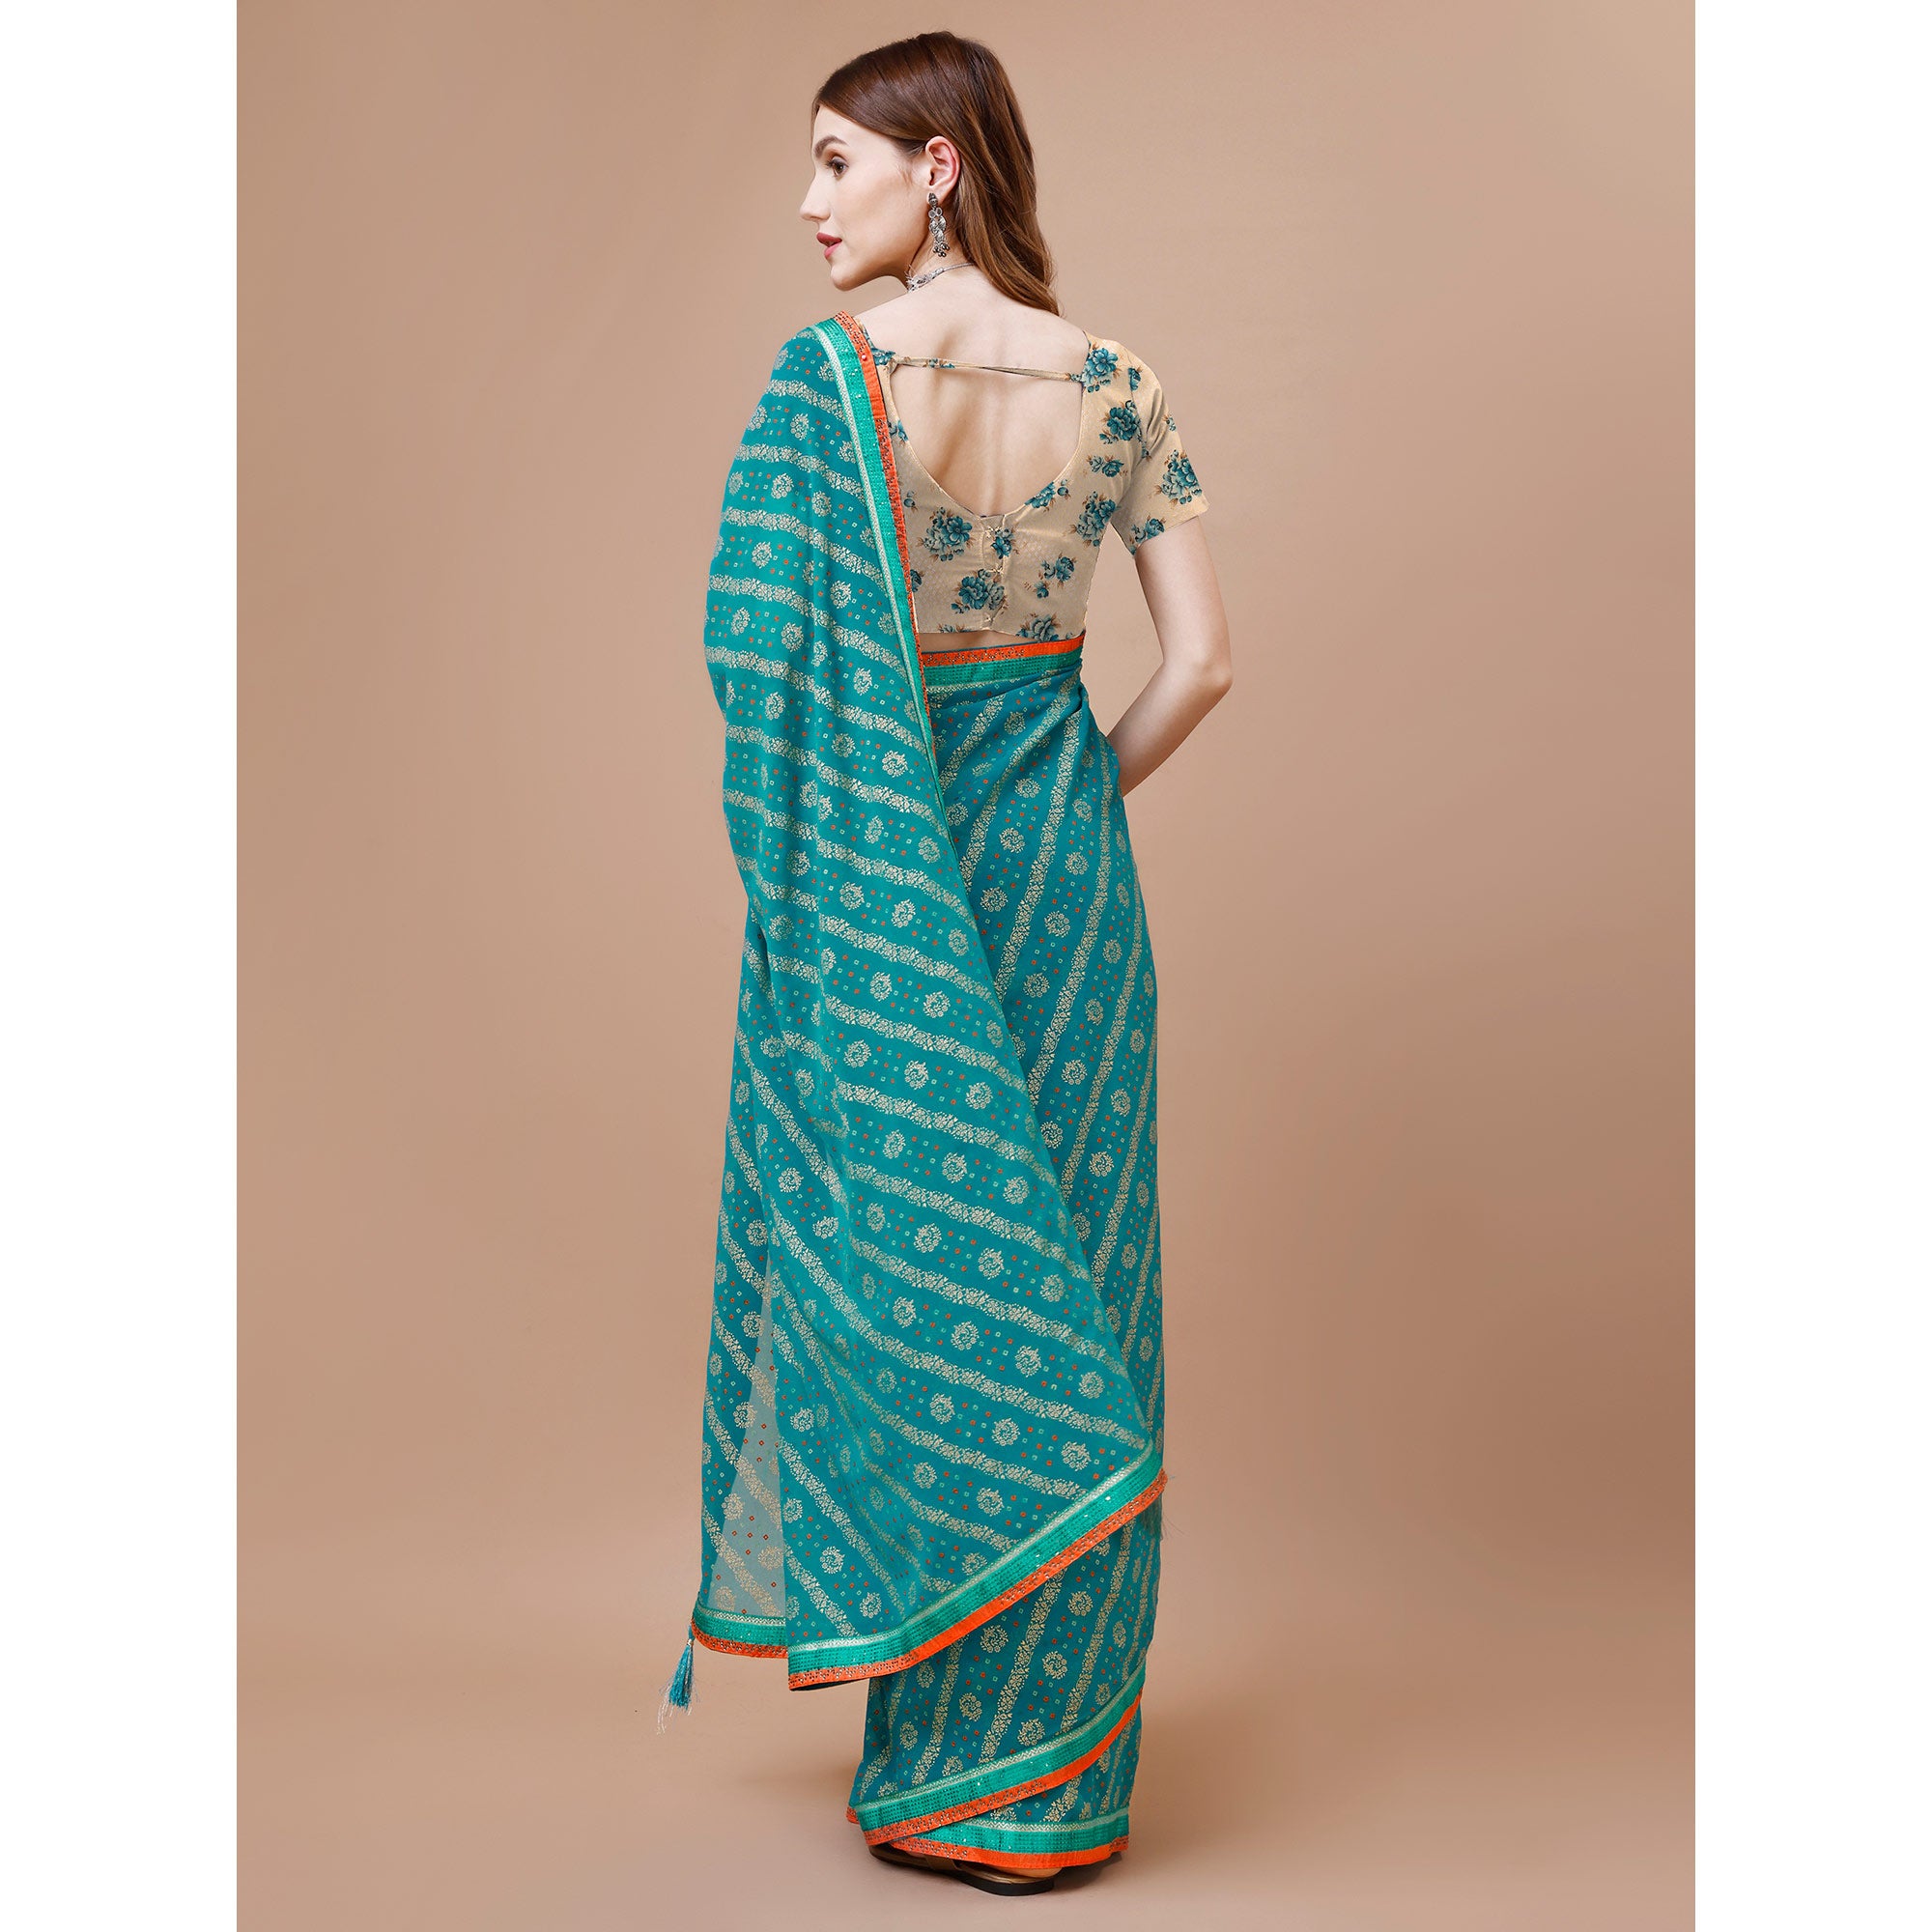 Rama Blue Floral Foil Printed Chiffon Saree With Lace Border